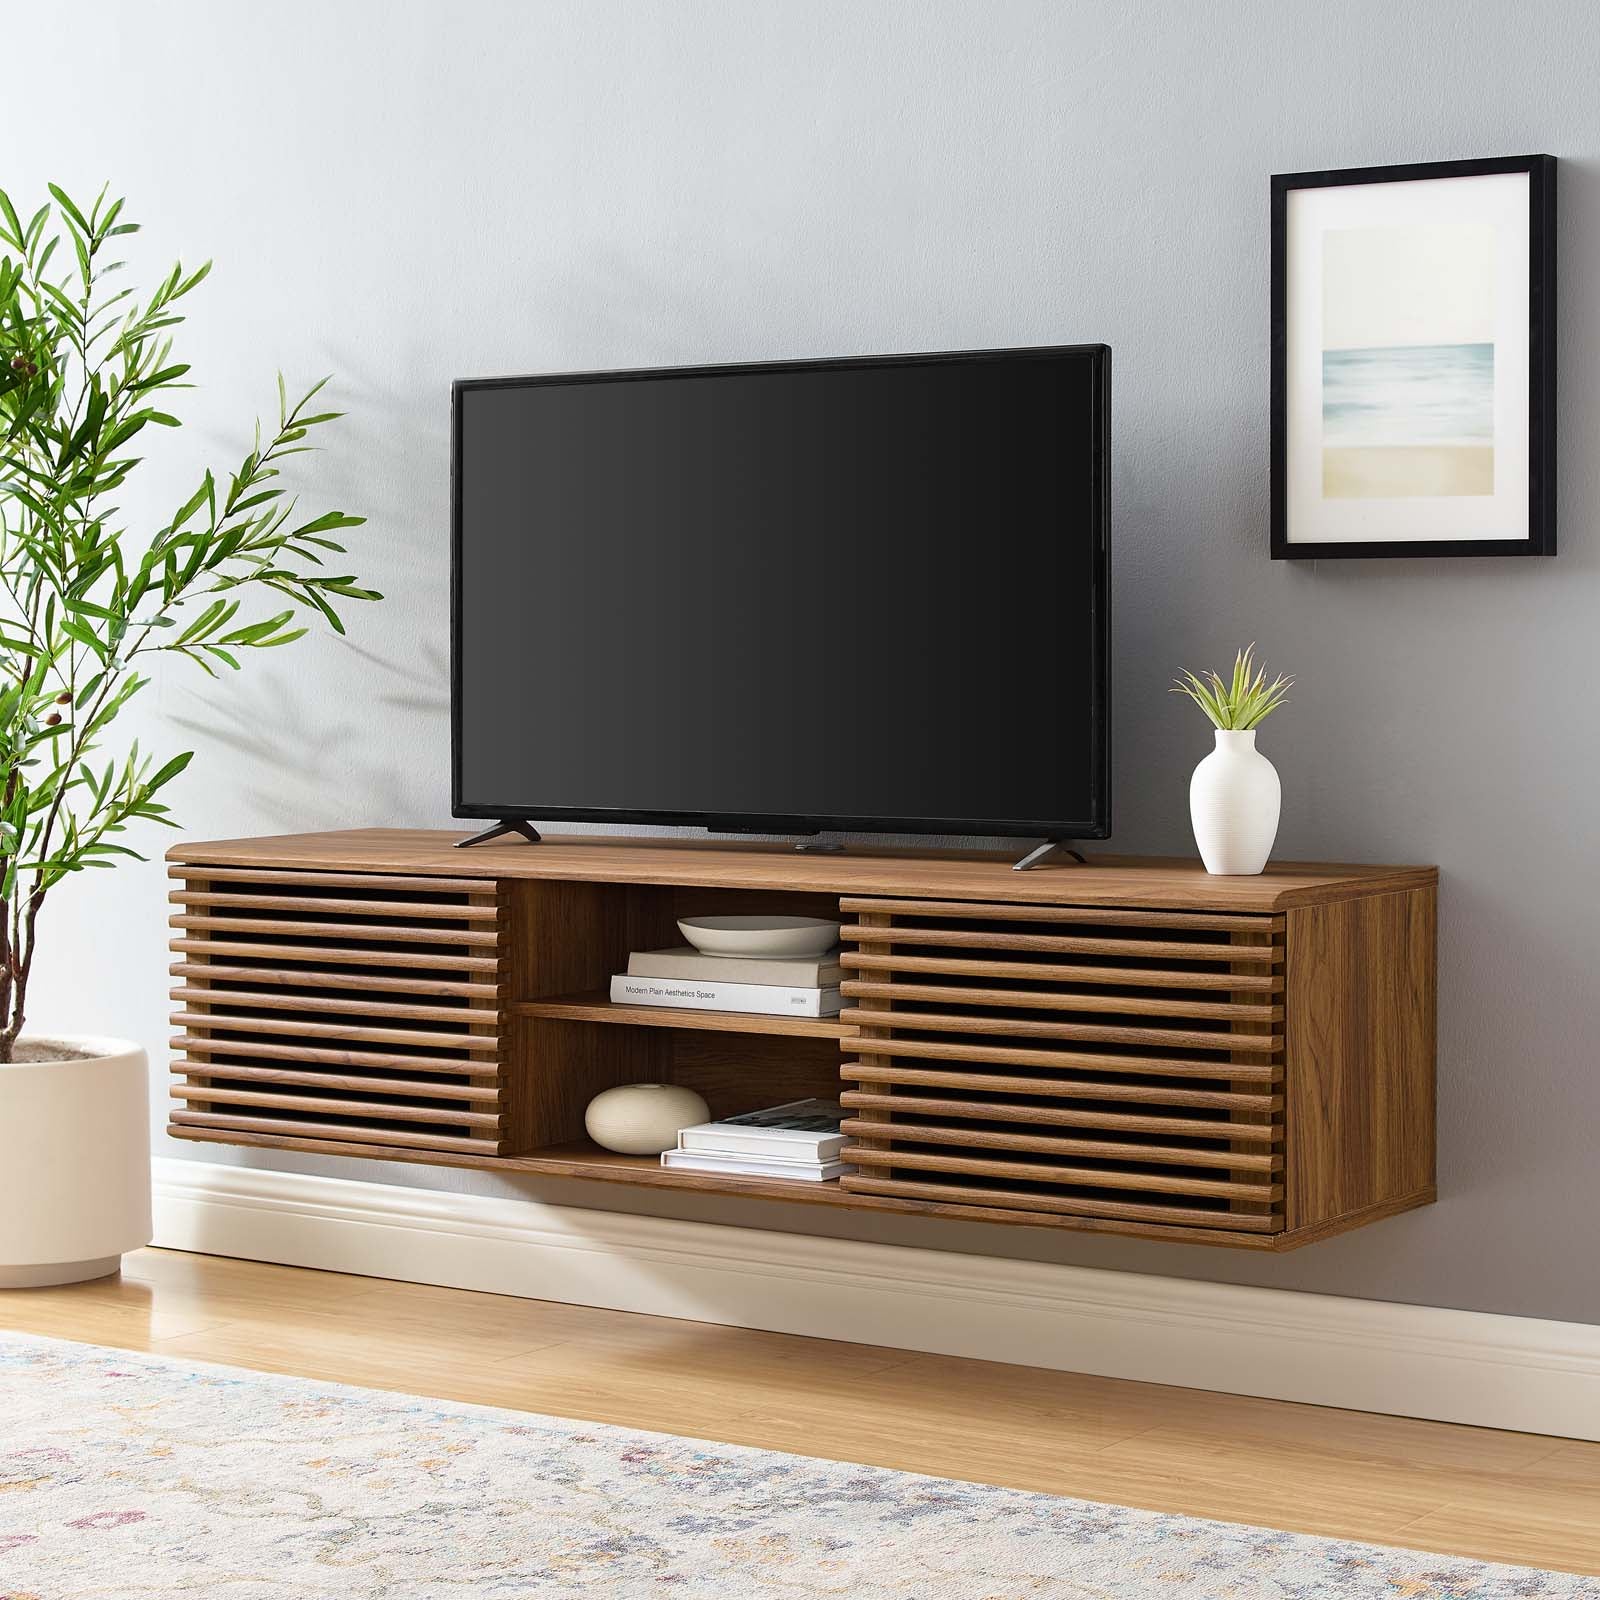 Render 60" Wall-Mount Media Console TV Stand - East Shore Modern Home Furnishings